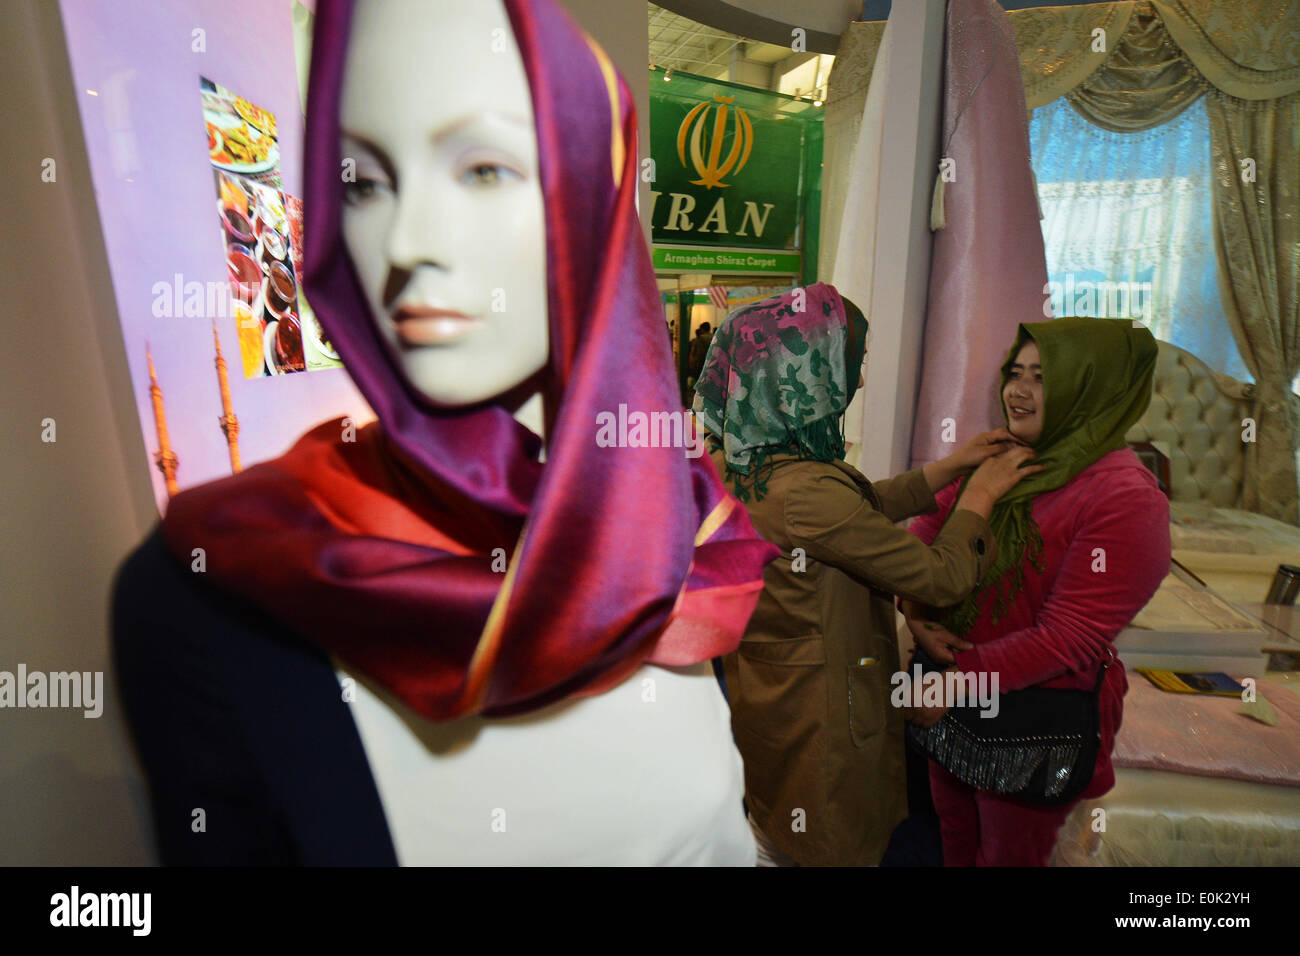 Xining, China's Qinghai Province. 15th May, 2014. Women try on headscarves at an Iranian exhibition stand during the 2014 China International Halal Food and Products Fair in Xining, capital of northwest China's Qinghai Province, May 15, 2014. The three-day fair kicked off Thursday, attracting 960 enterprises from 37 countries and regions. © Wu Gang/Xinhua/Alamy Live News Stock Photo